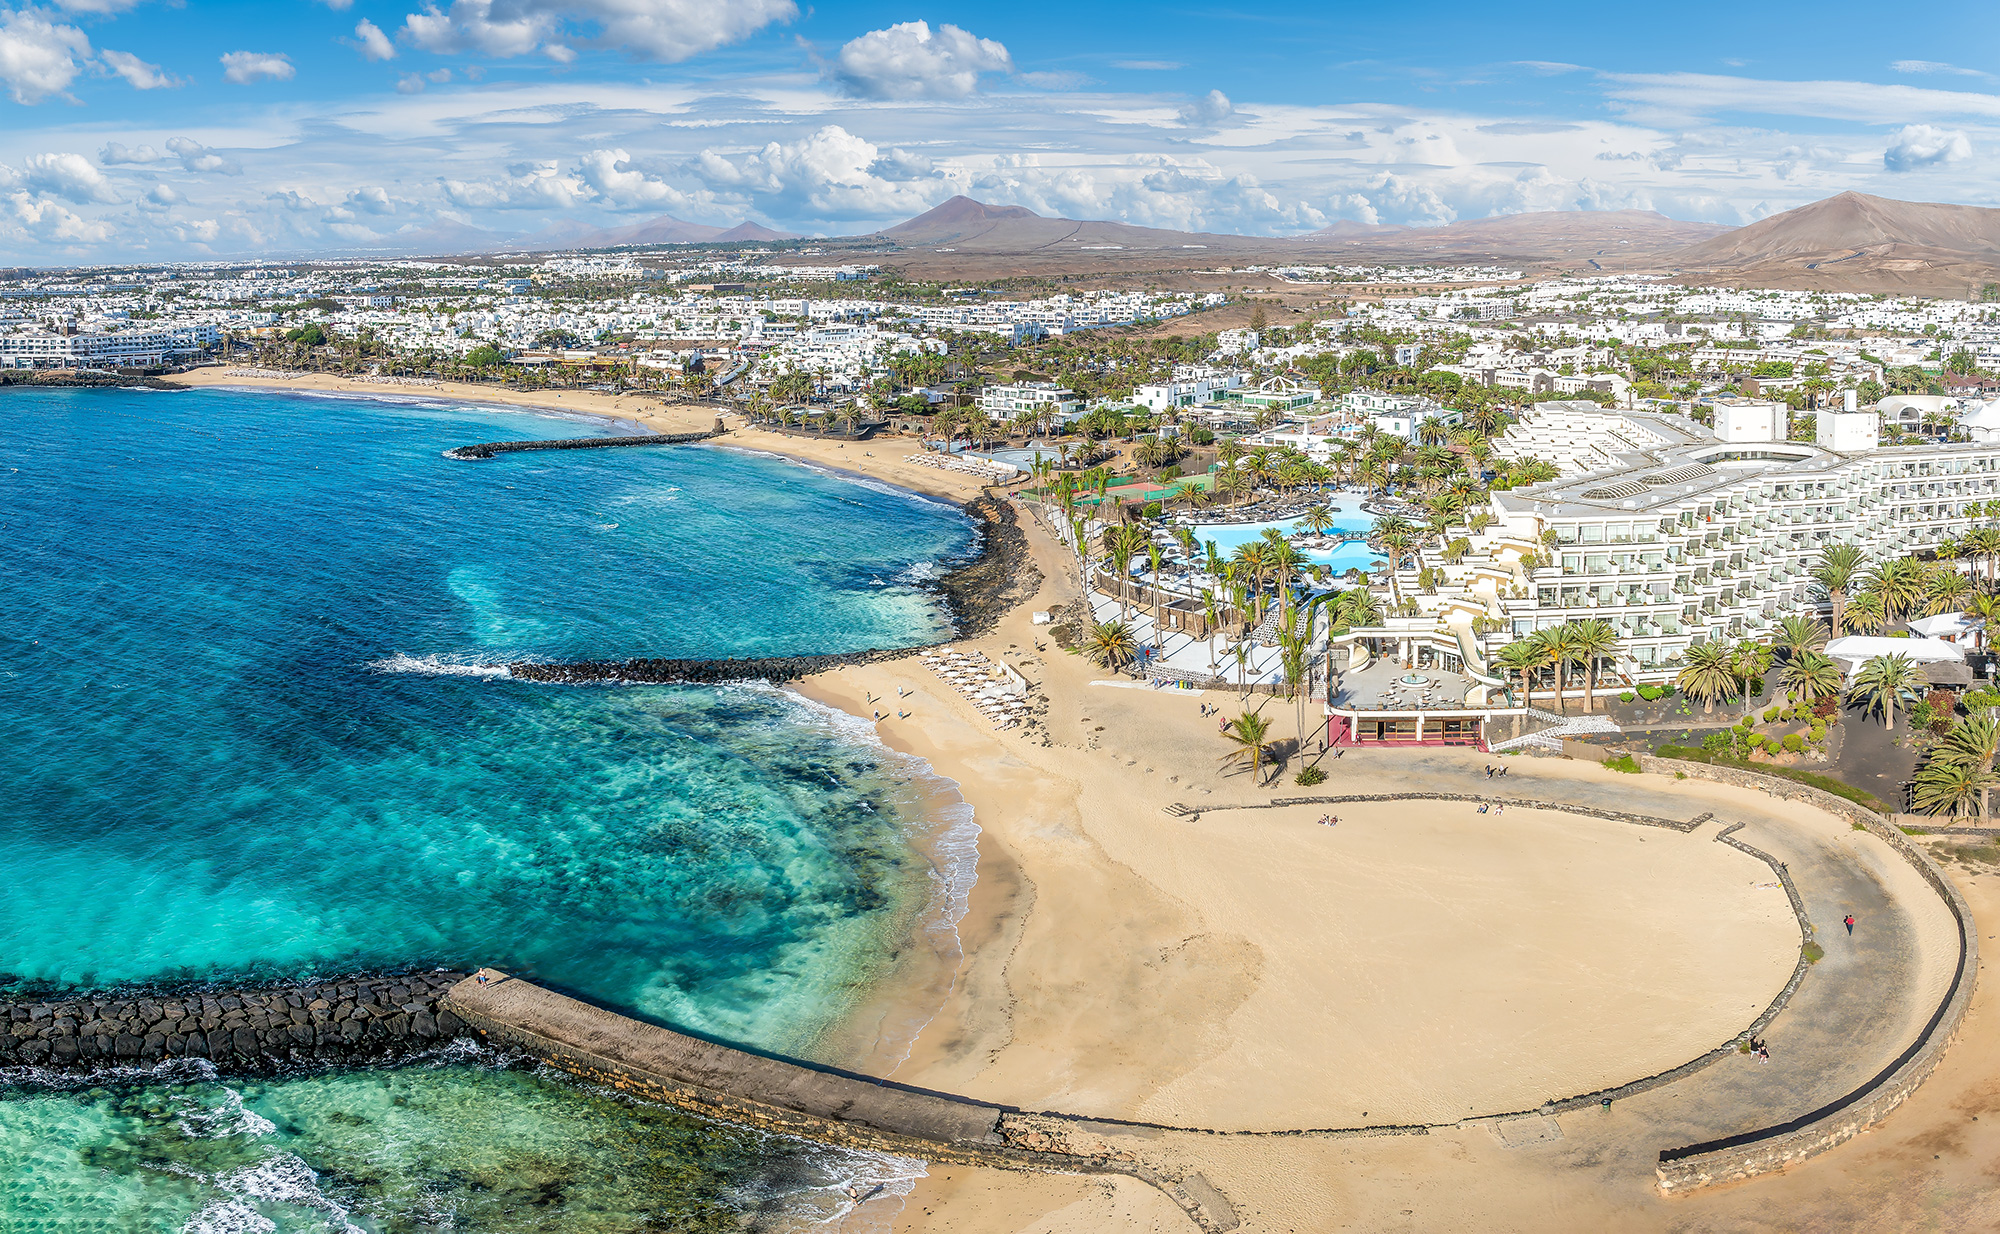 a picture of a town with a beach in lanzarote, canary islands